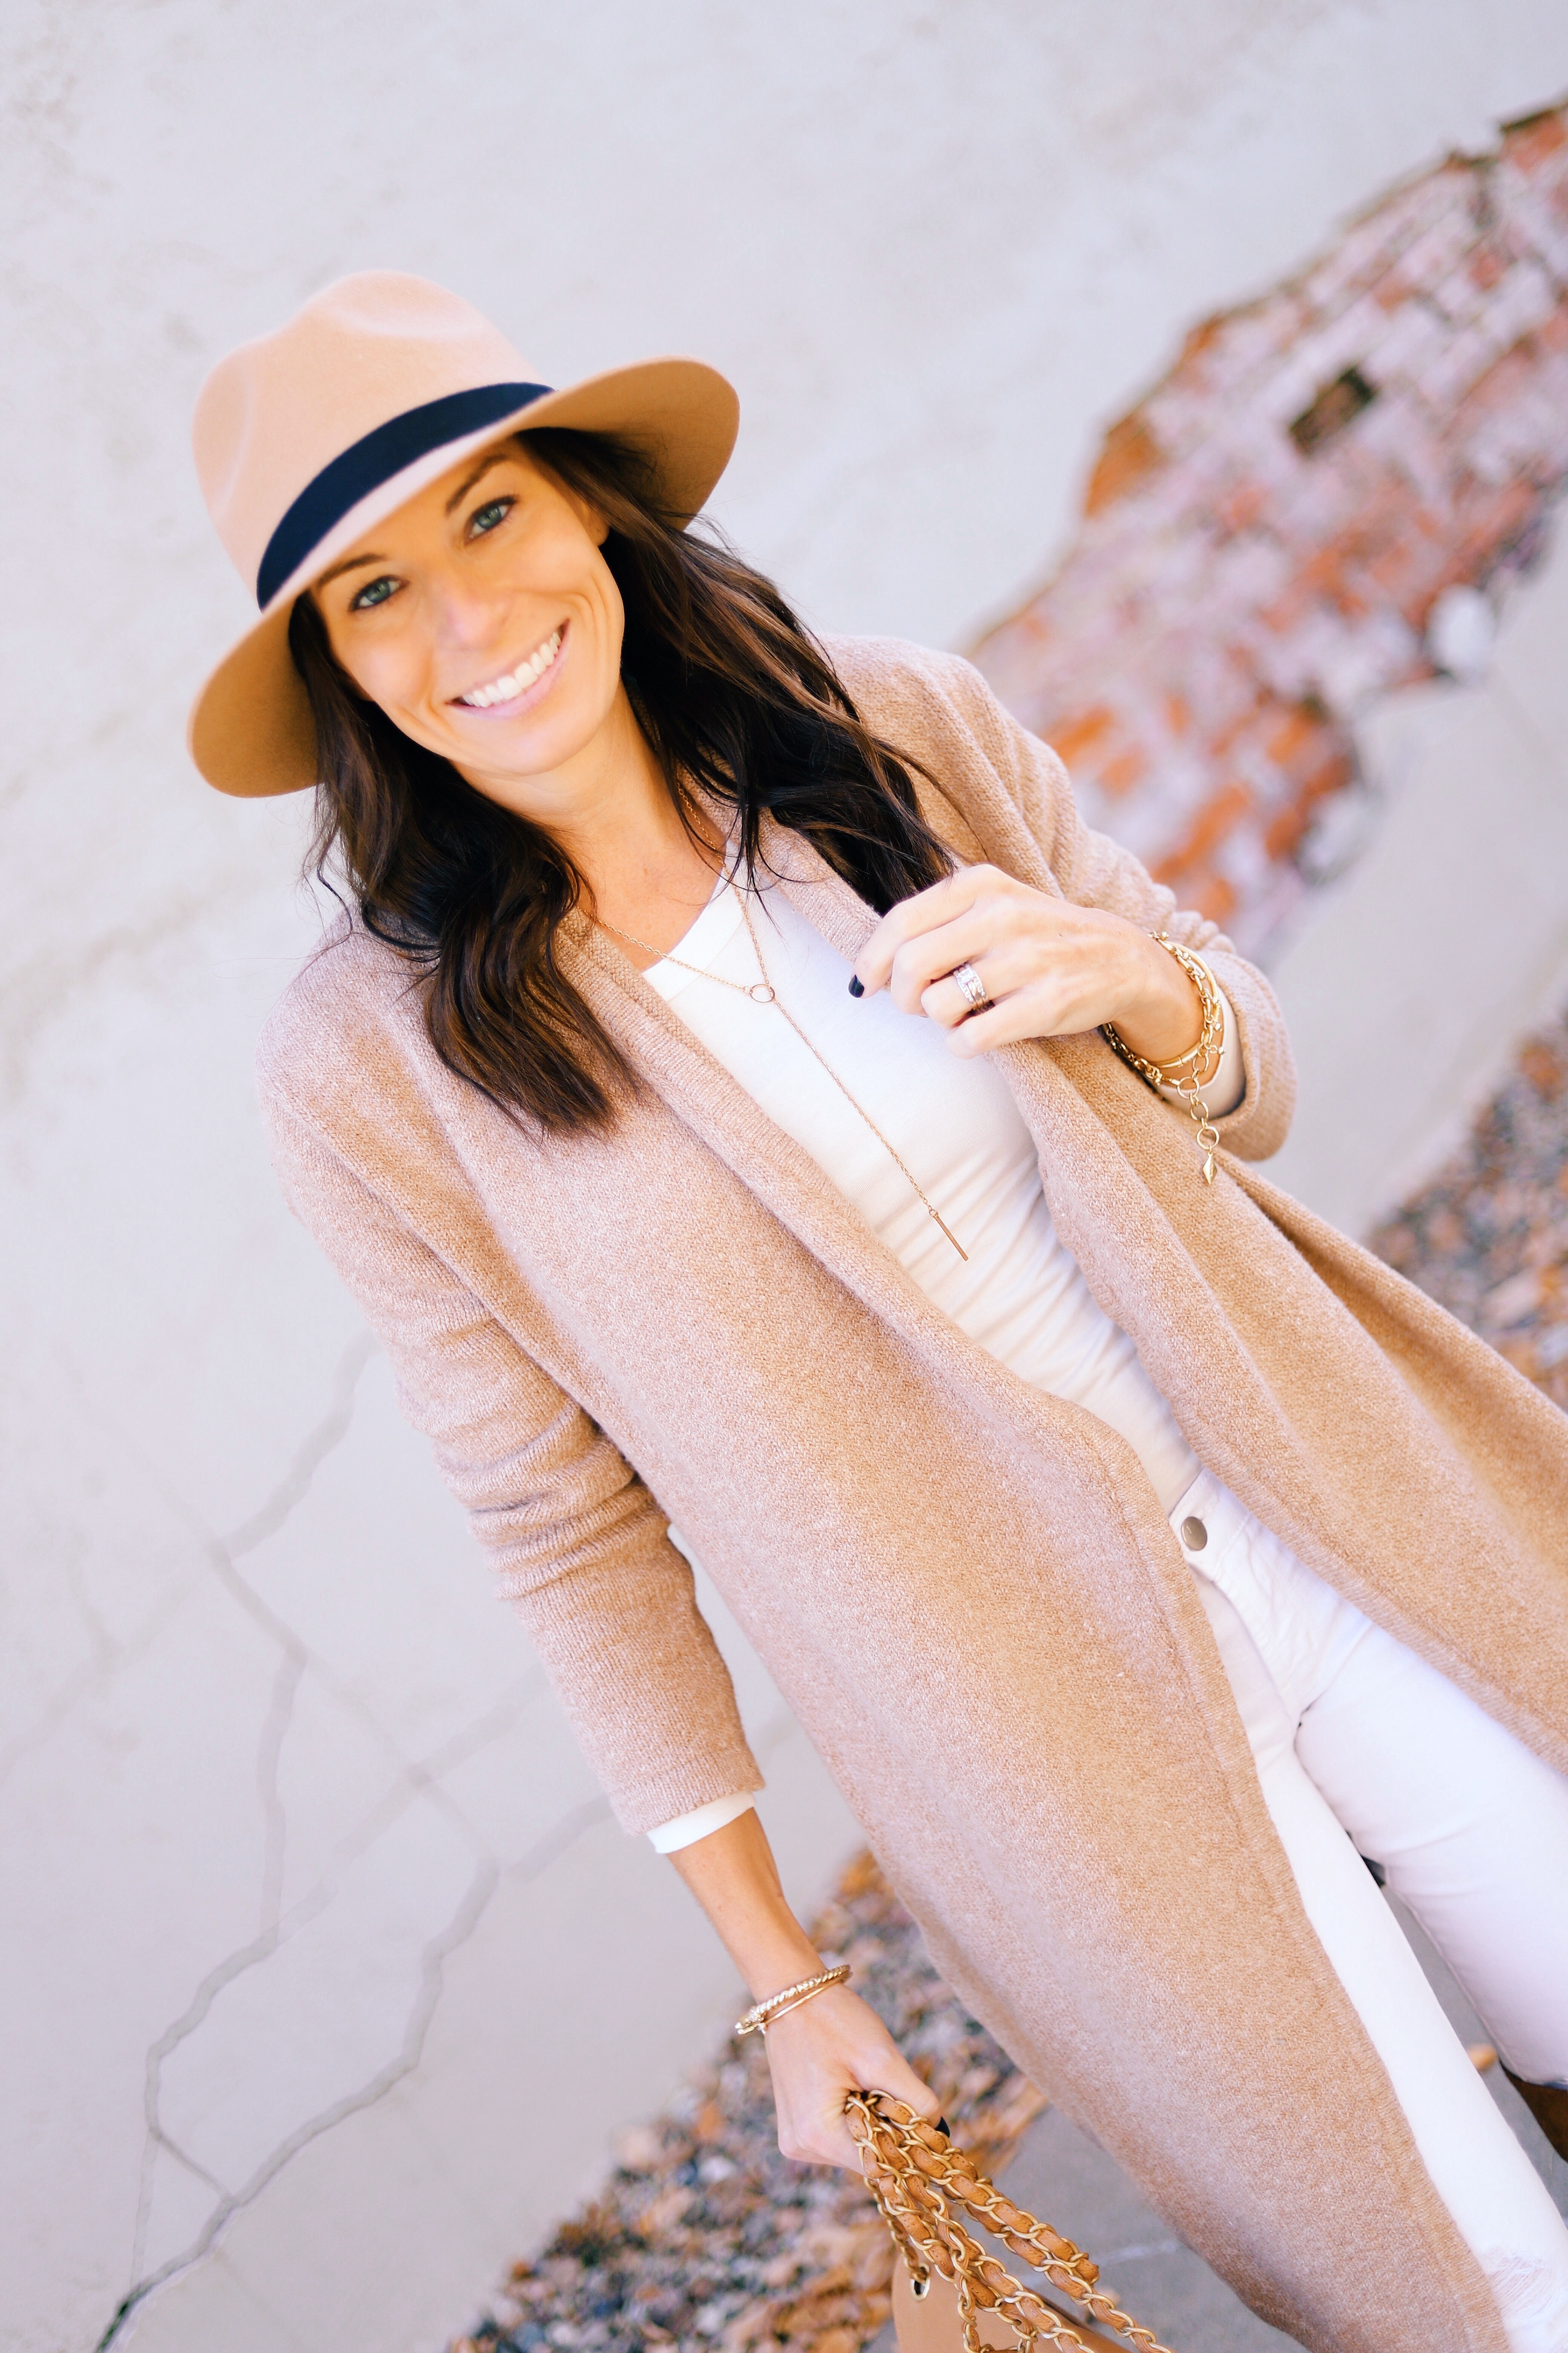 Long Camel Cardigan Outfit white pants J Brand Cupcakes and Cashmere Revolve Chanel Nordstrom Hat White Jeans Target Thermal Rocksbox Gold Necklace